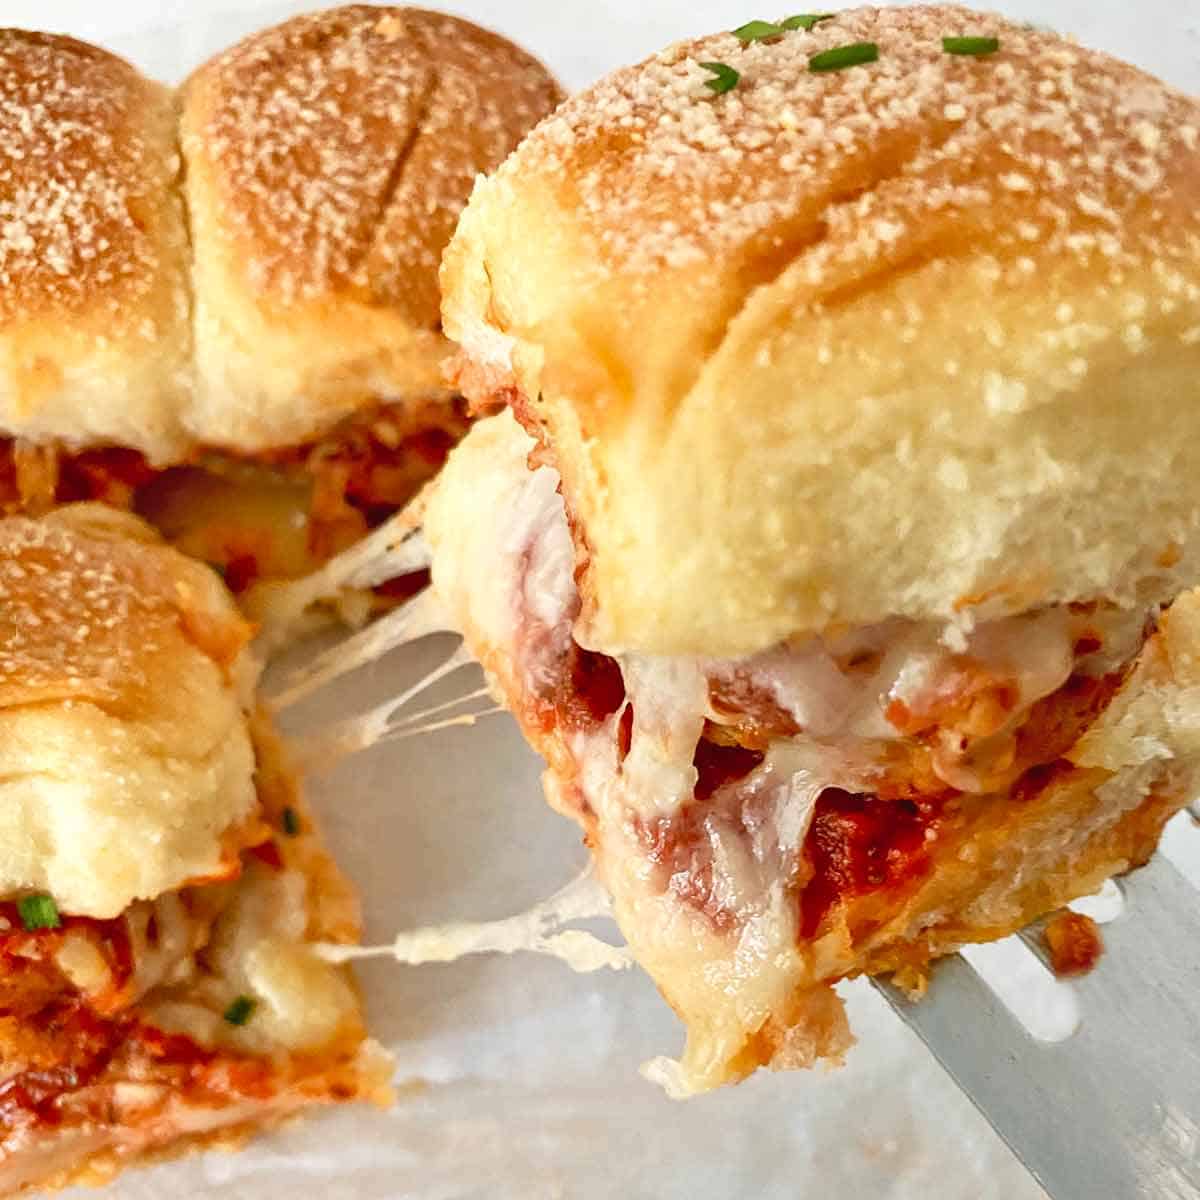 Lifting a meatball slider from the pan with melting cheese pulling apart.